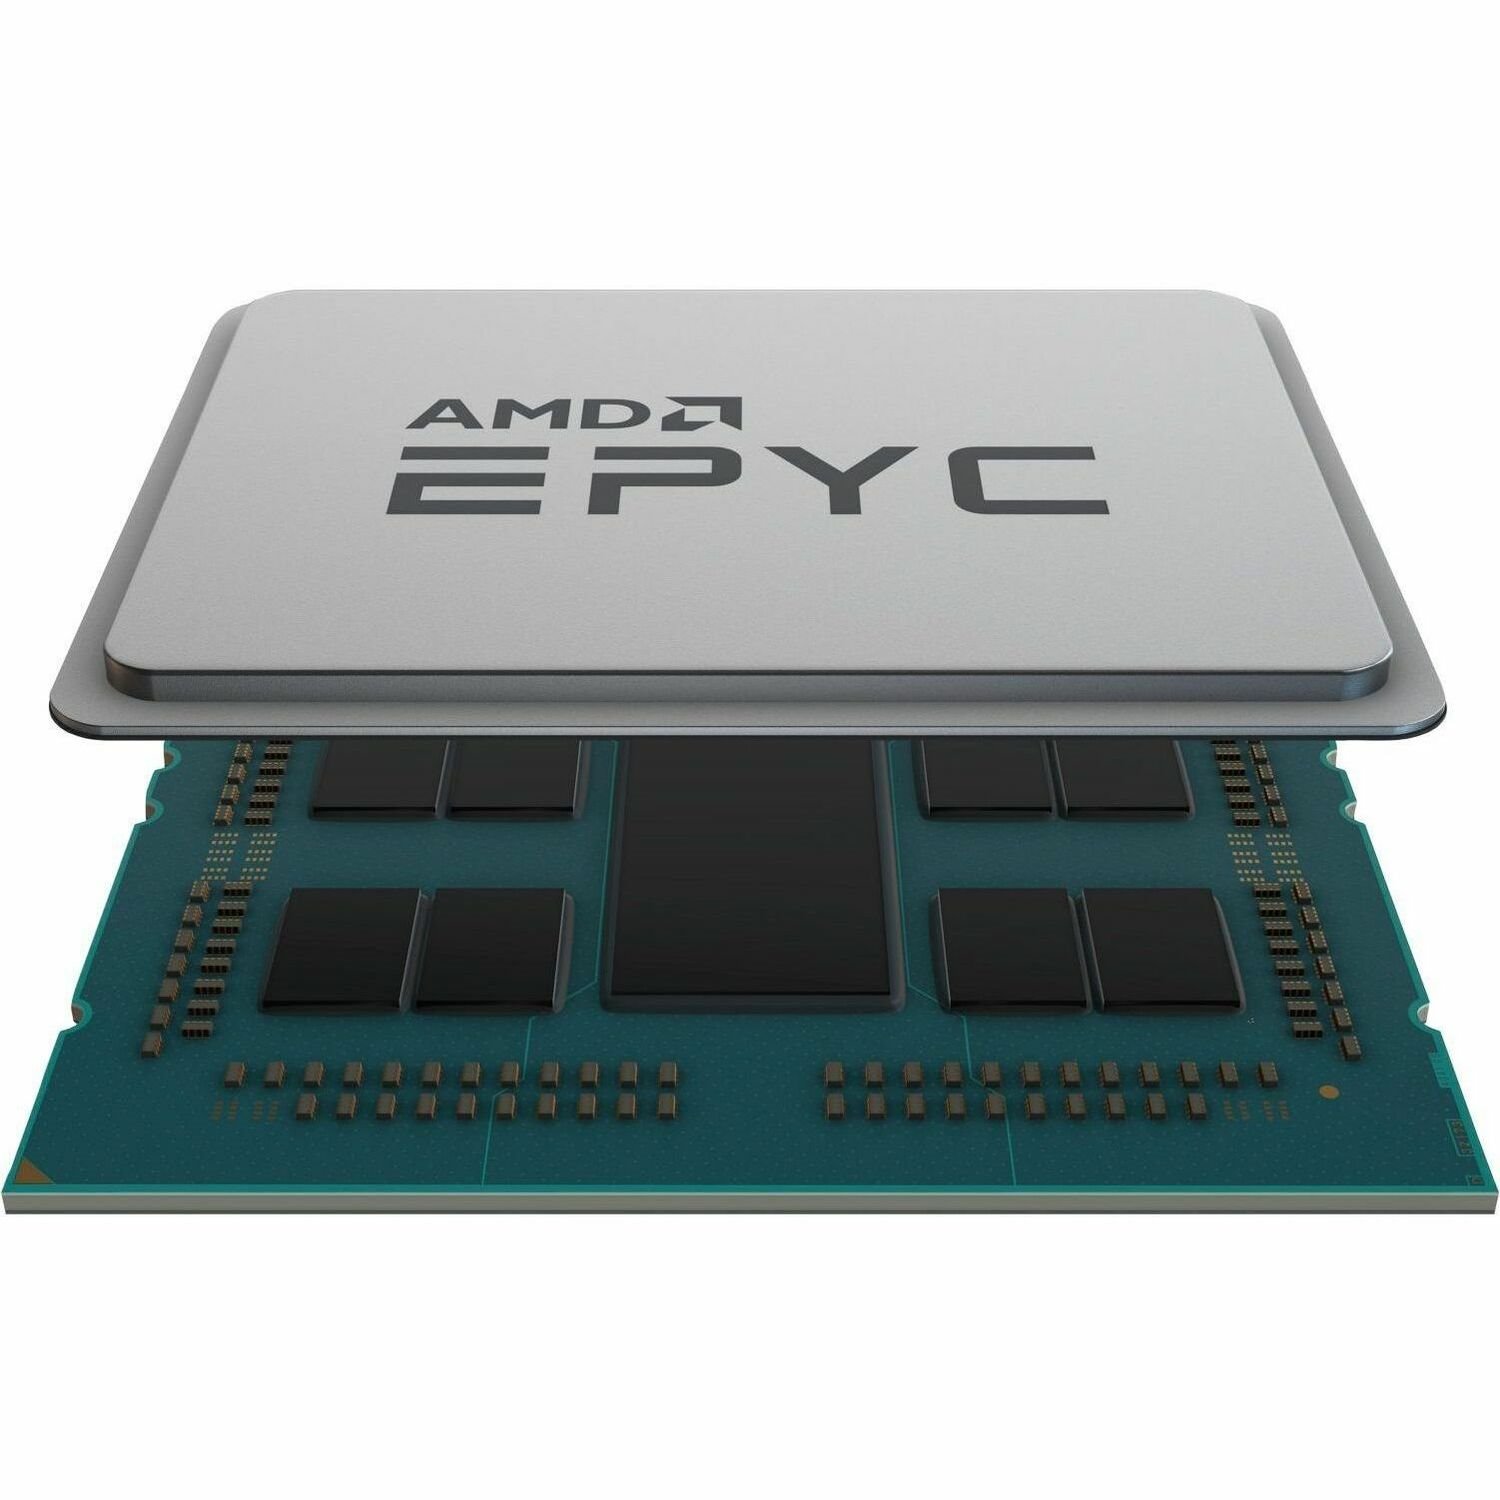 HPE AMD EPYC 9004 (4th Gen) 9734 Dodecahecta-core (112 Core) 2.20 GHz Processor Upgrade